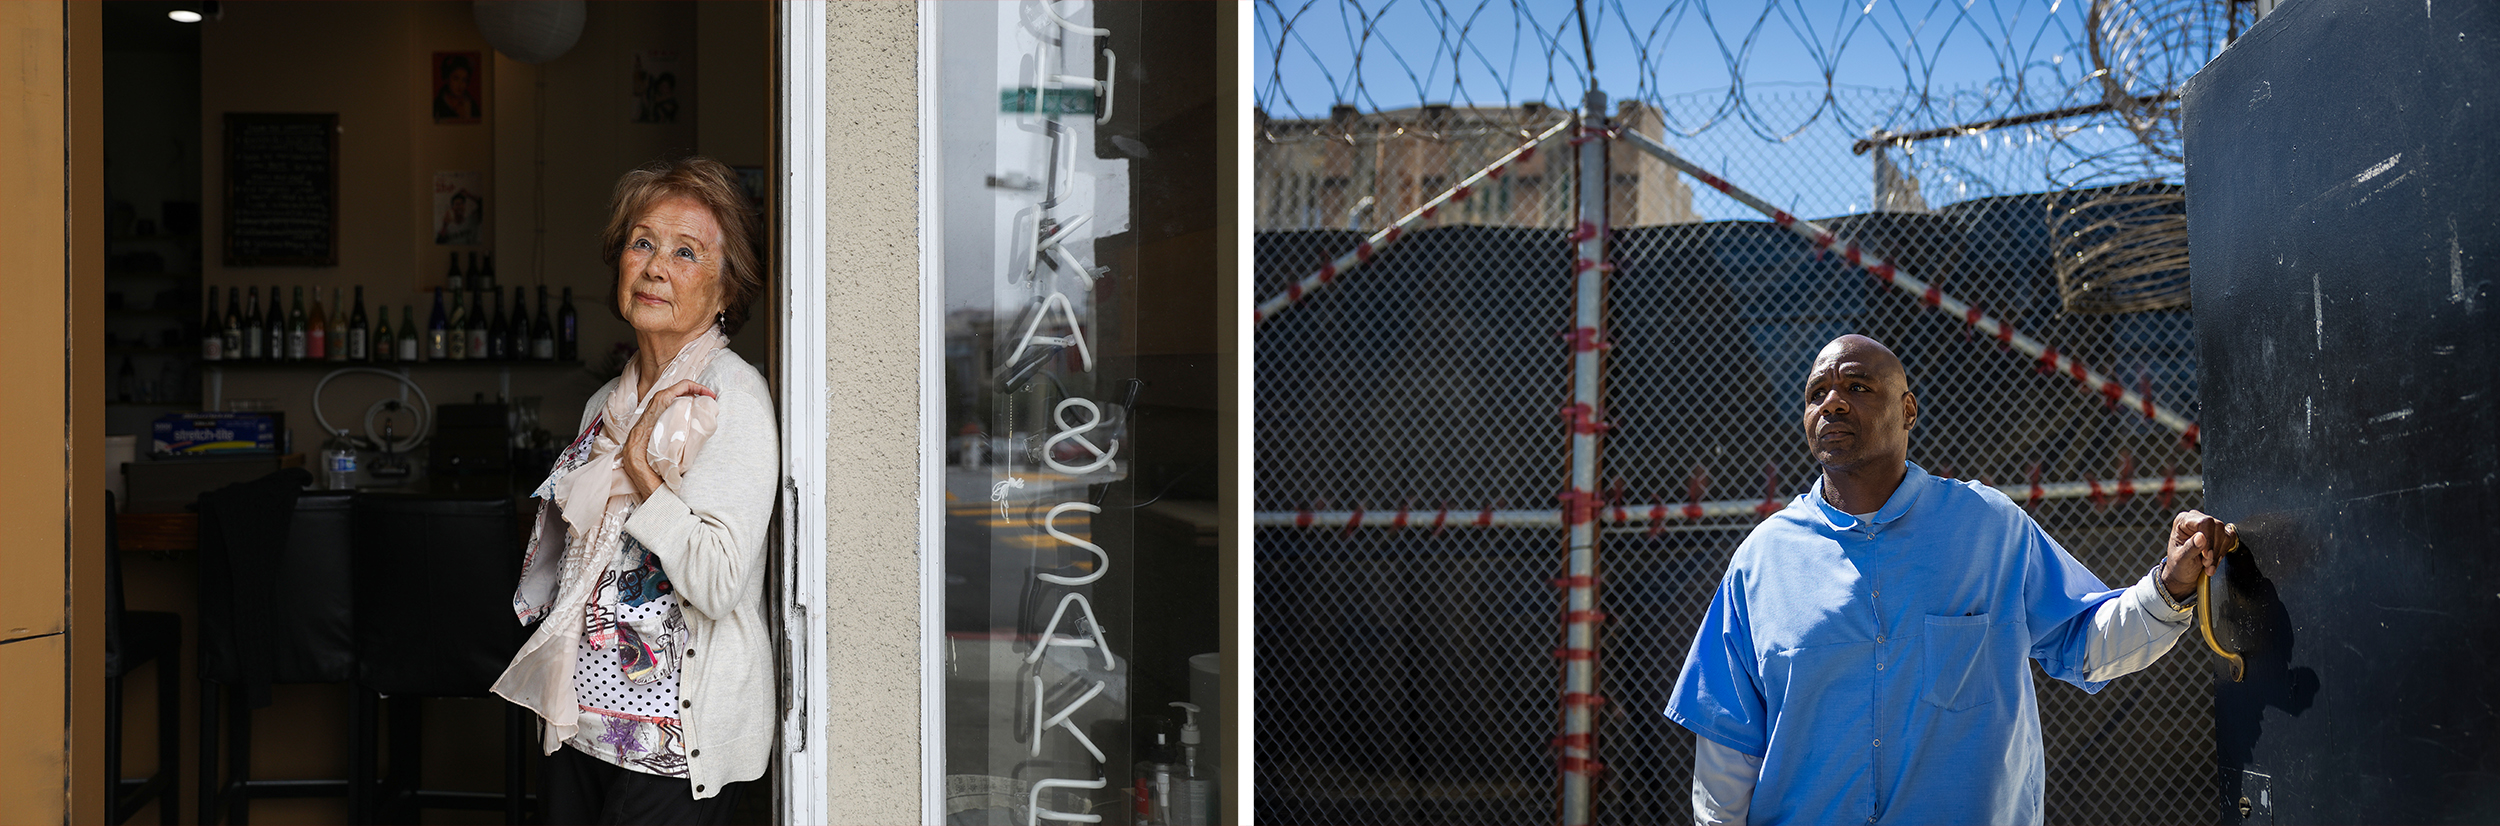 Two photos: On the left, a person with long hair standing in the doorway to a restaurant. On the right, a person with a bald head and blue jumpsuit stands beside a door in front of a large gate covered in concertina wire.